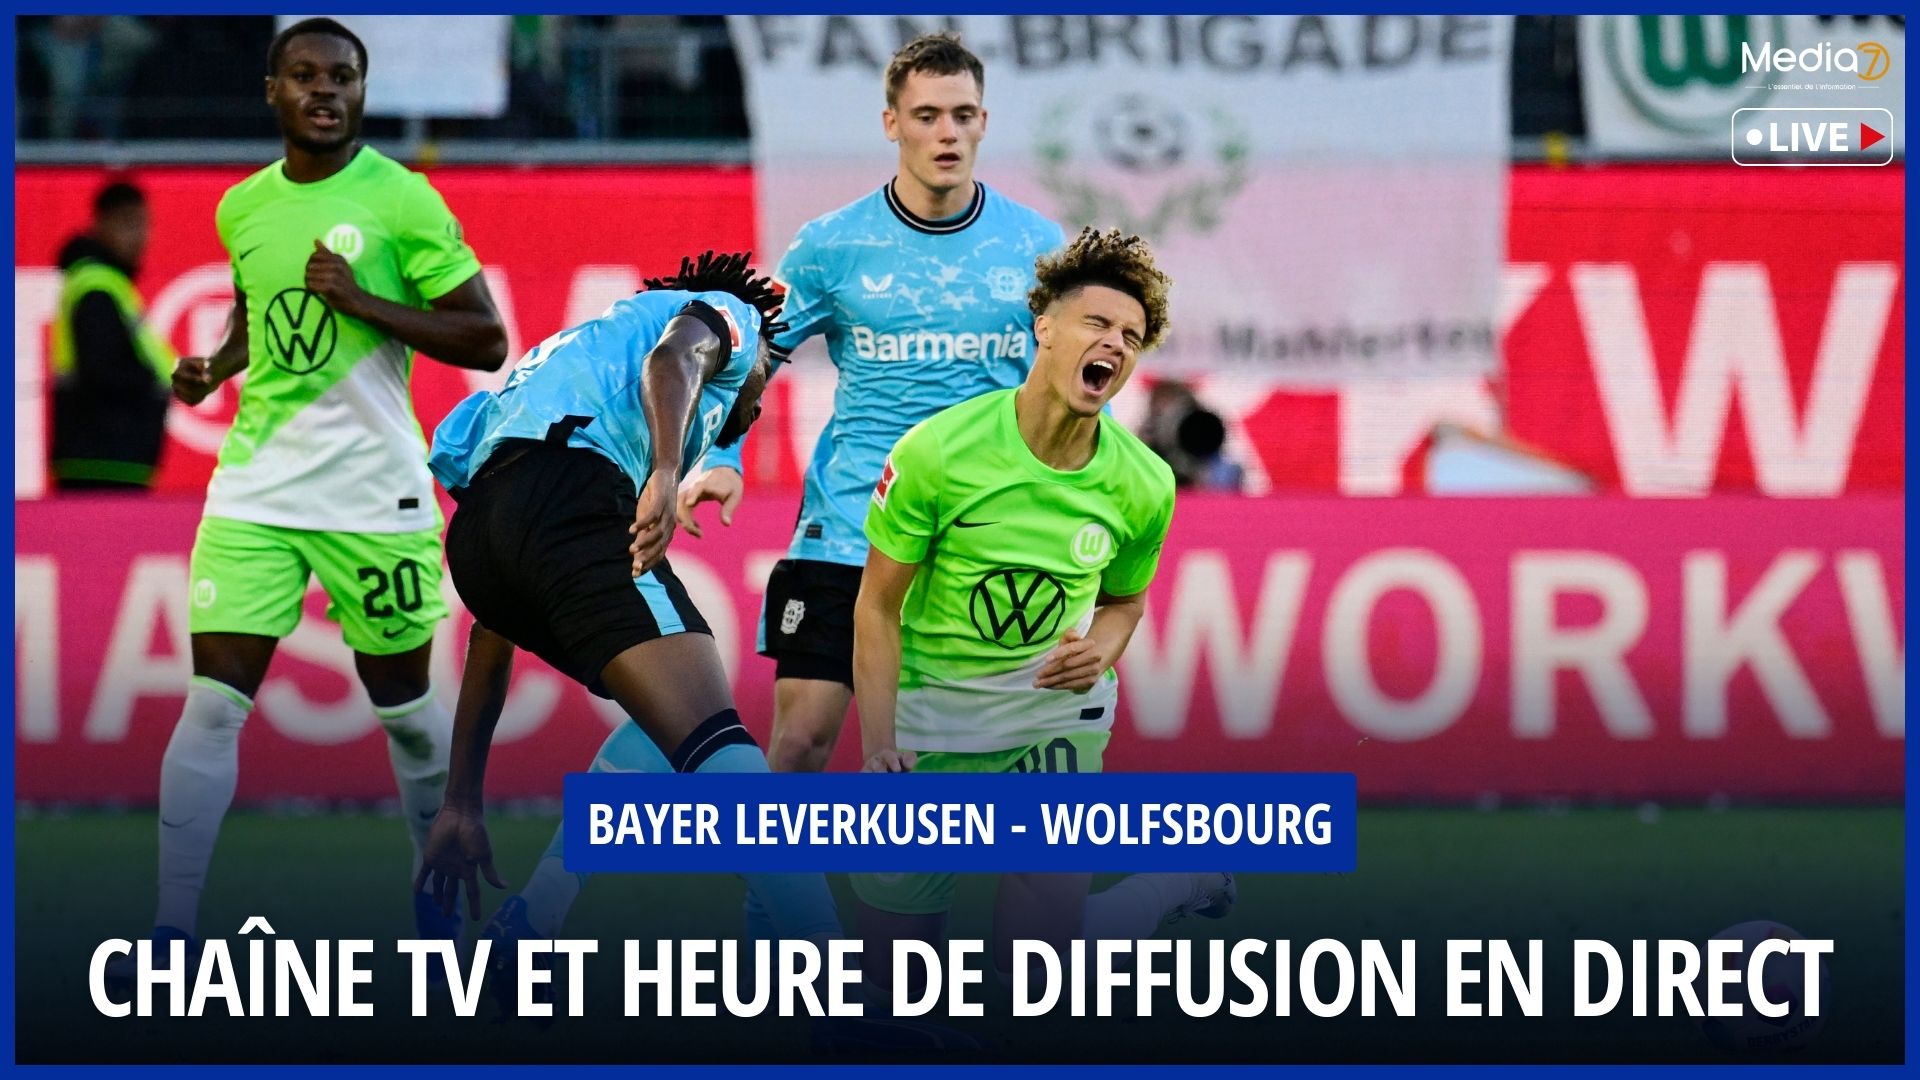 Broadcast of the Bayer Leverkusen - Wolfsburg Match live: On which TV channel & in Streaming? What time ? - Media7